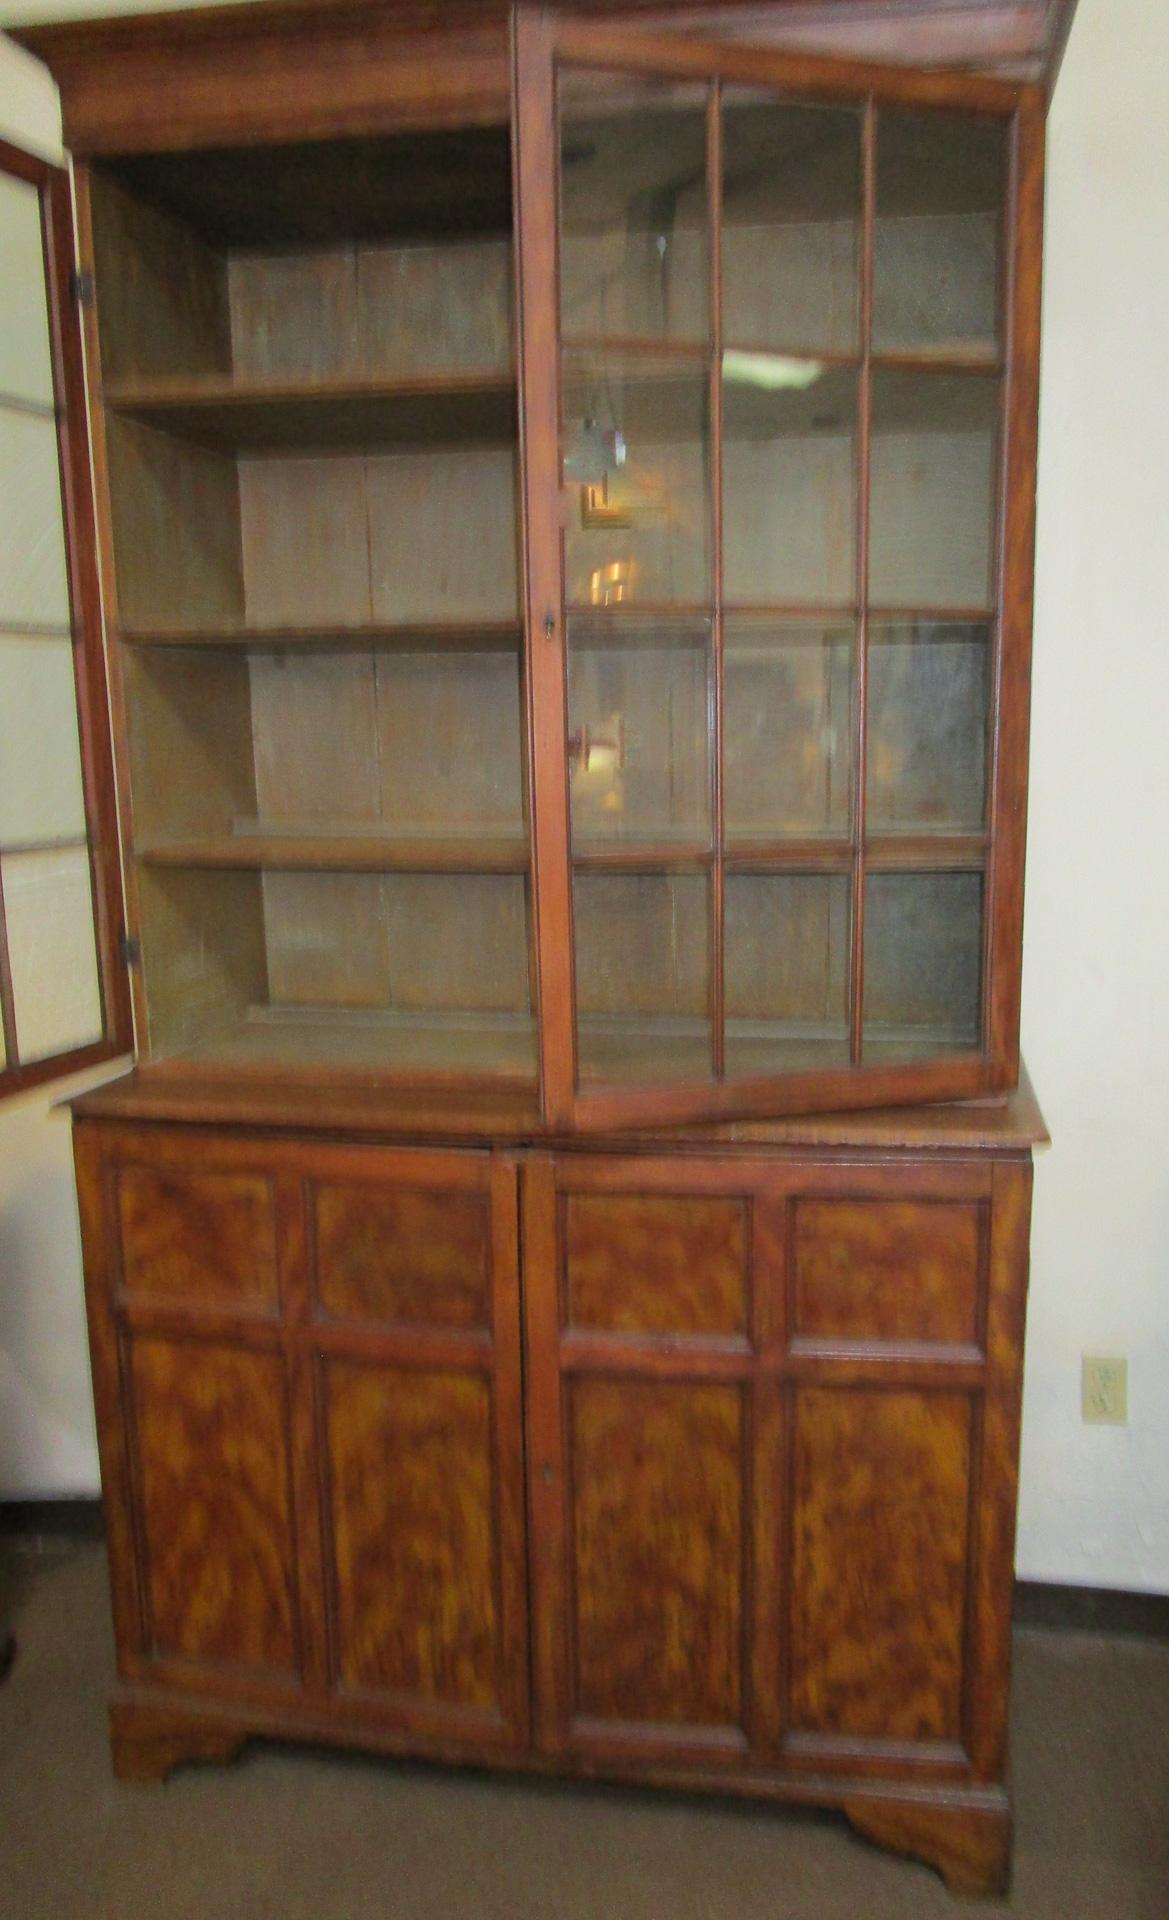 This unusual English pine cupboard is faux painted to resemble mahogany and features the original 24 hand blown wavy glass door panels. There are four shelves at the top and two deep shelves on each side of the closed door panels at the bottom. The